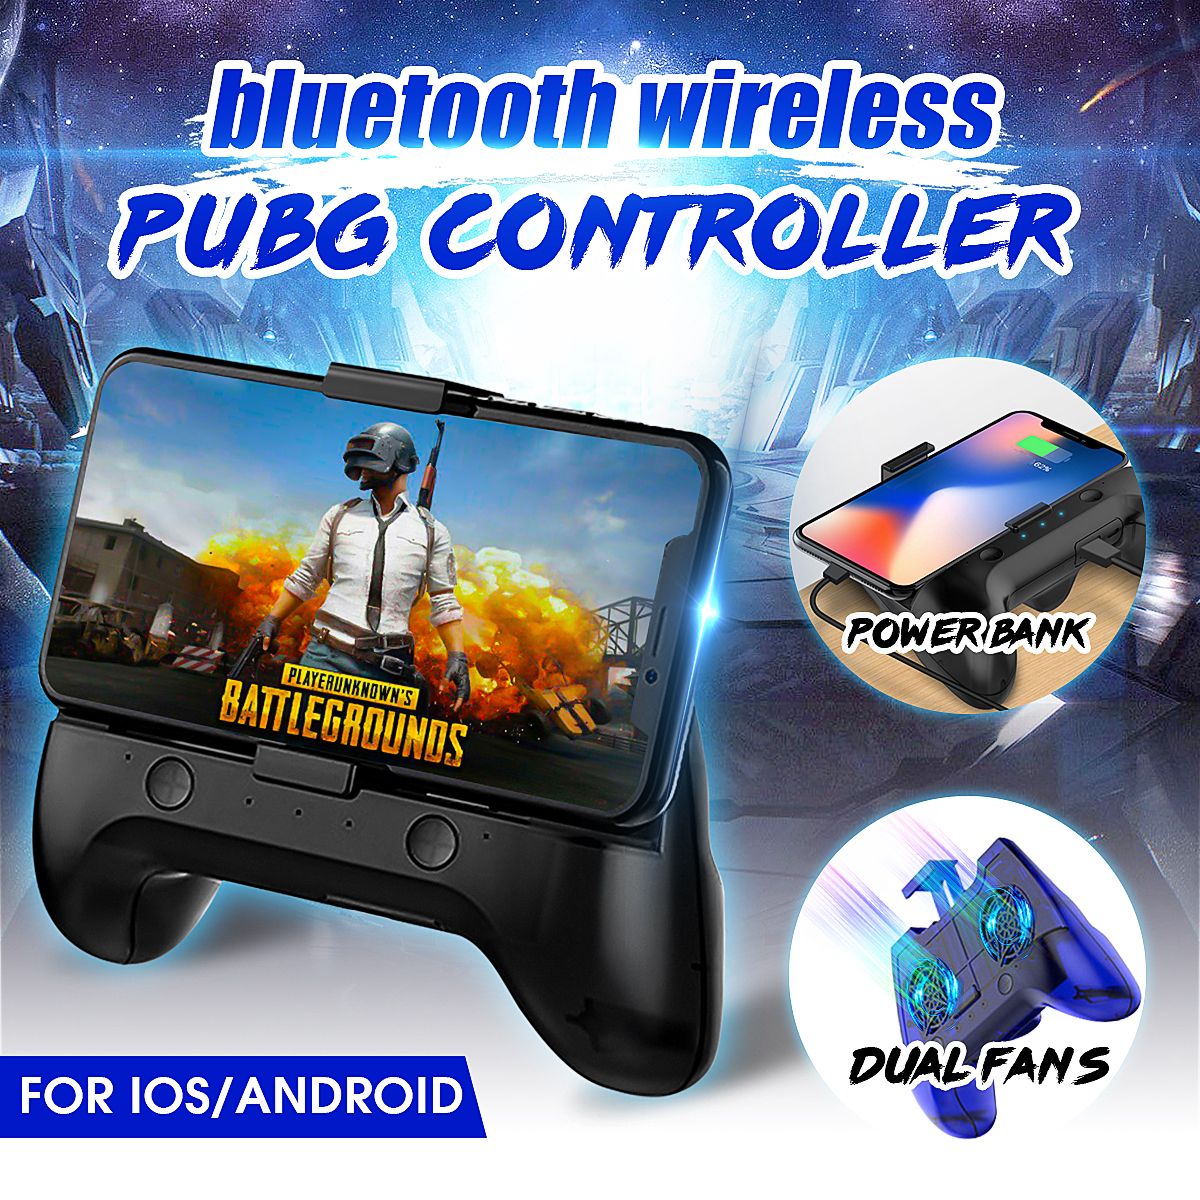 Wireless-bluetooth-Gamepad-Game-Controller-Joystick-Cooling-Fan-for-PUBG-Android-IOS-Mobile-Phone-1461047